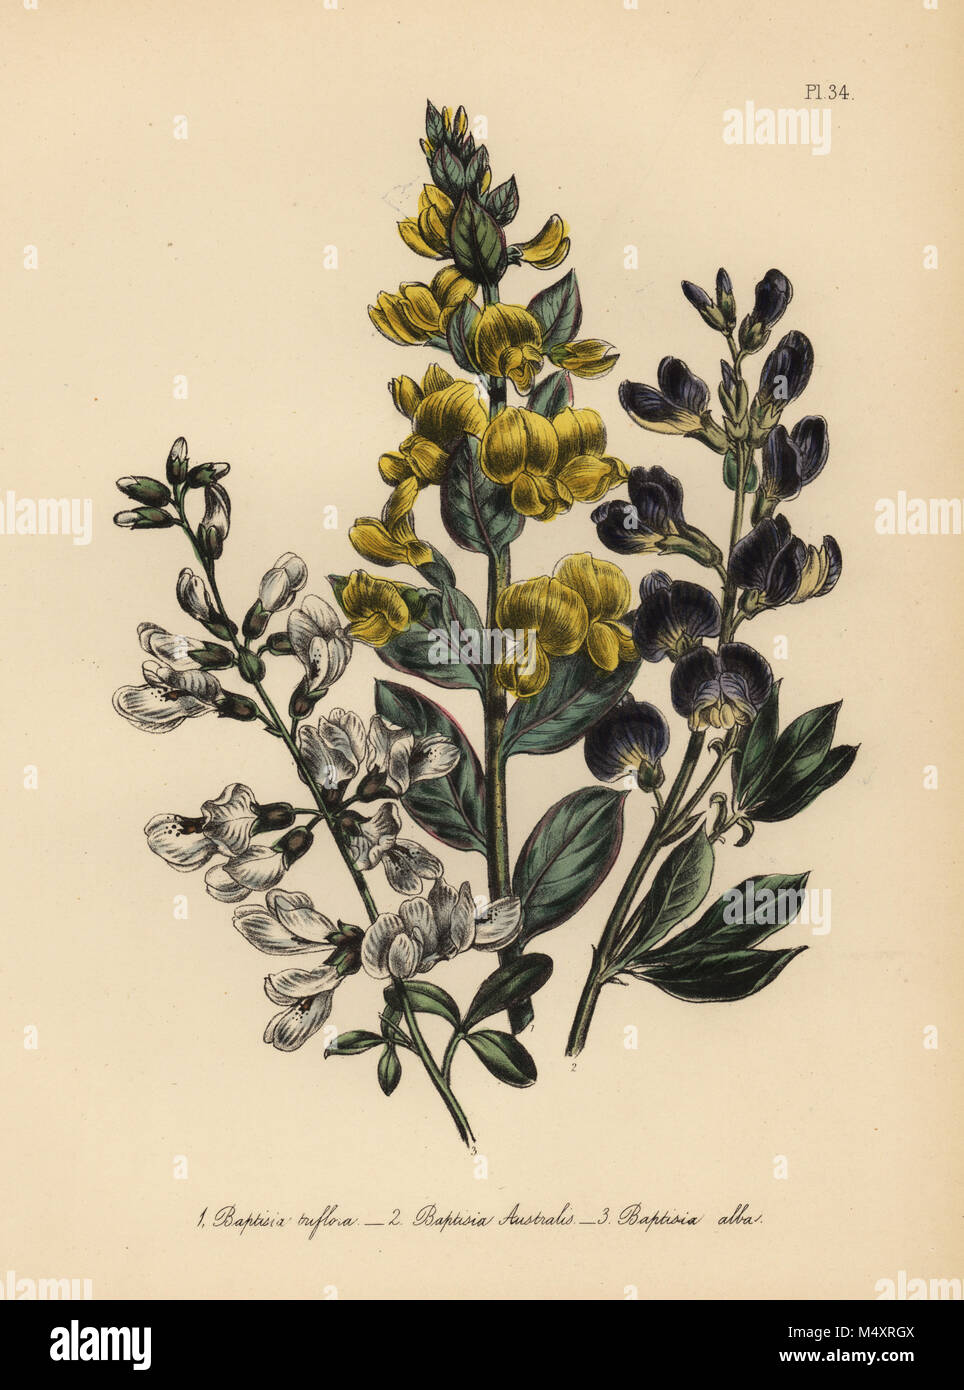 Three-flowered rafnia, Rafnia triflora, Baptisia australis, and white baptisia, Baptisia alba. Handfinished chromolithograph by Henry Noel Humphreys after an illustration by Jane Loudon from Mrs. Jane Loudon's Ladies Flower Garden of Ornamental Perennials, William S. Orr, London, 1849. Stock Photo